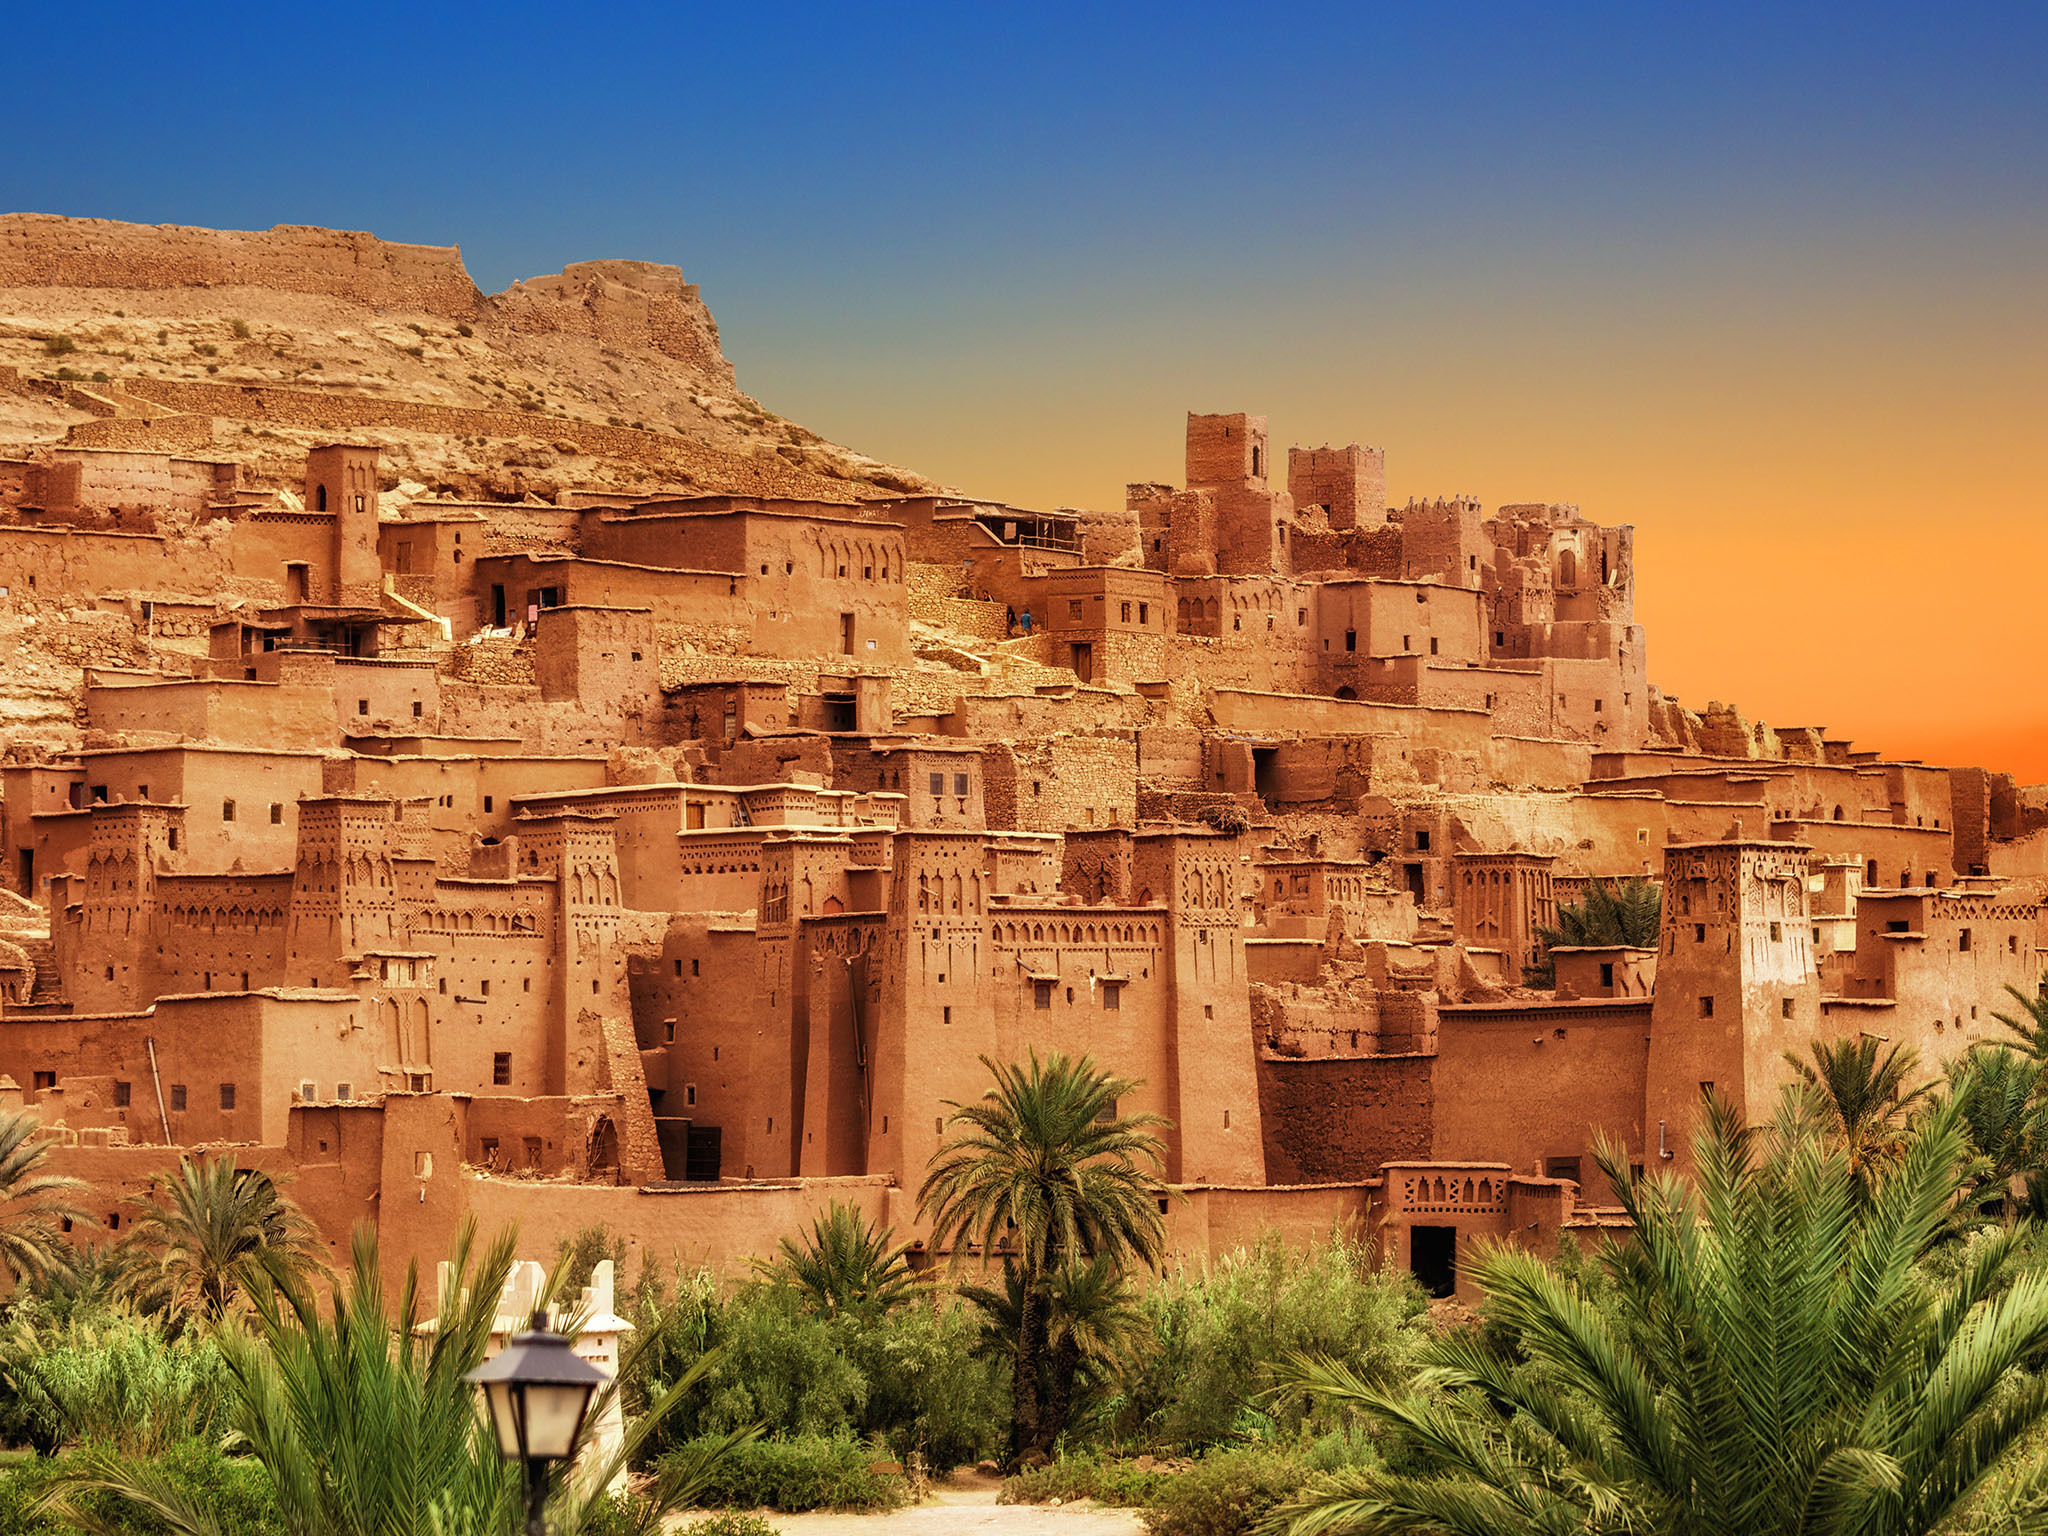 CDC Adds A New High Risk Country For Travel, But Morocco Leaves It